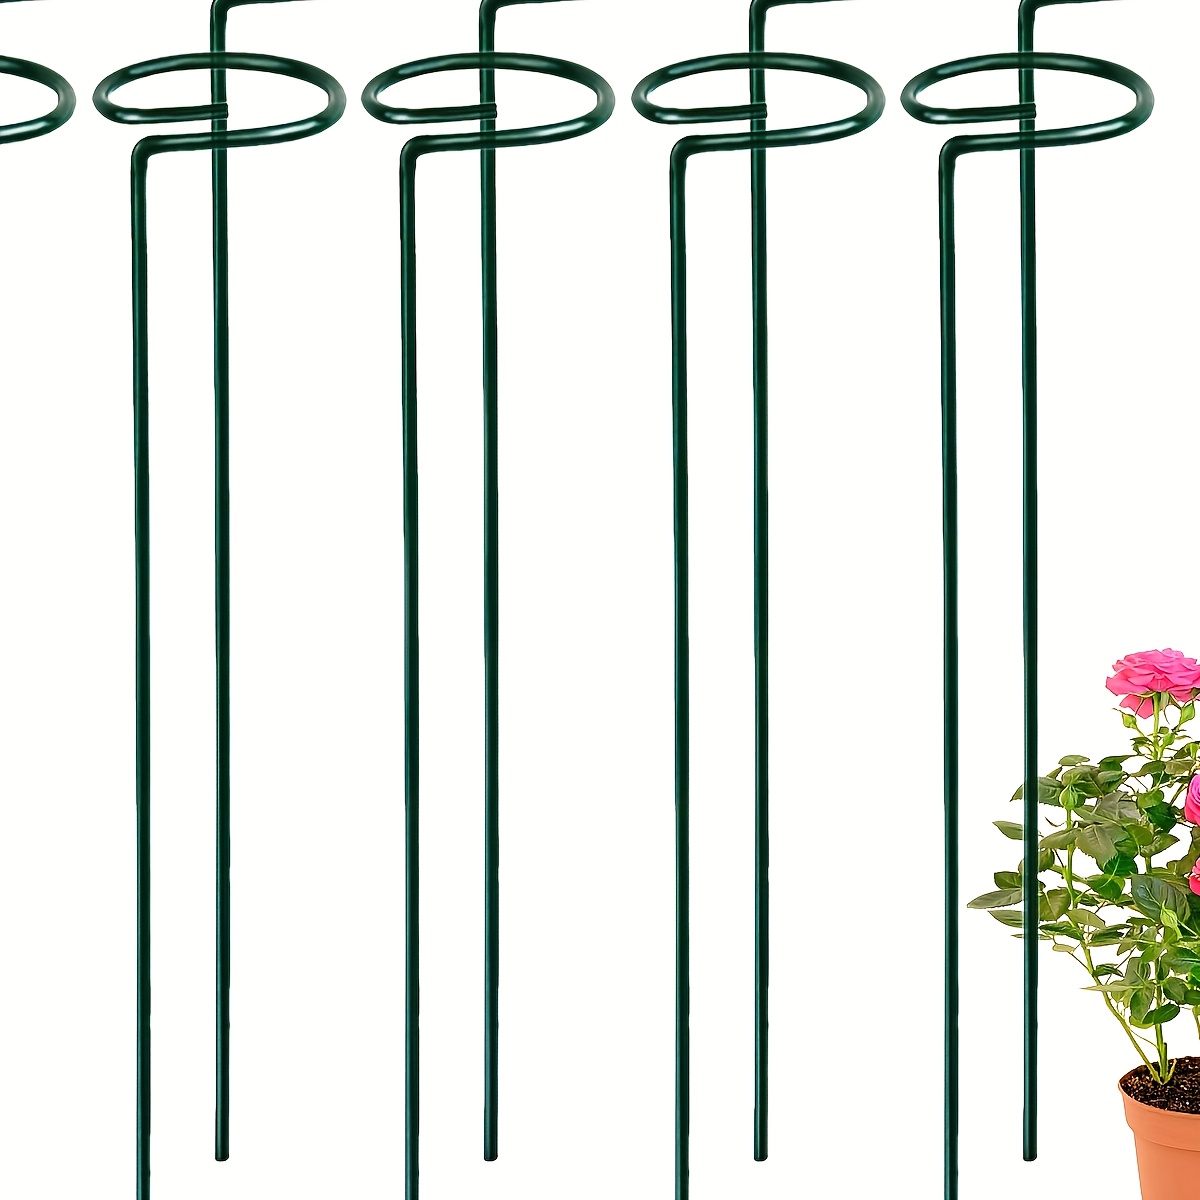 

4pcs/10pcs Garden Plant Stakes, Garden Metal Single Stem Plant Support, Garden Flower Support For Tomatoes, Orchid, Peony, Rose